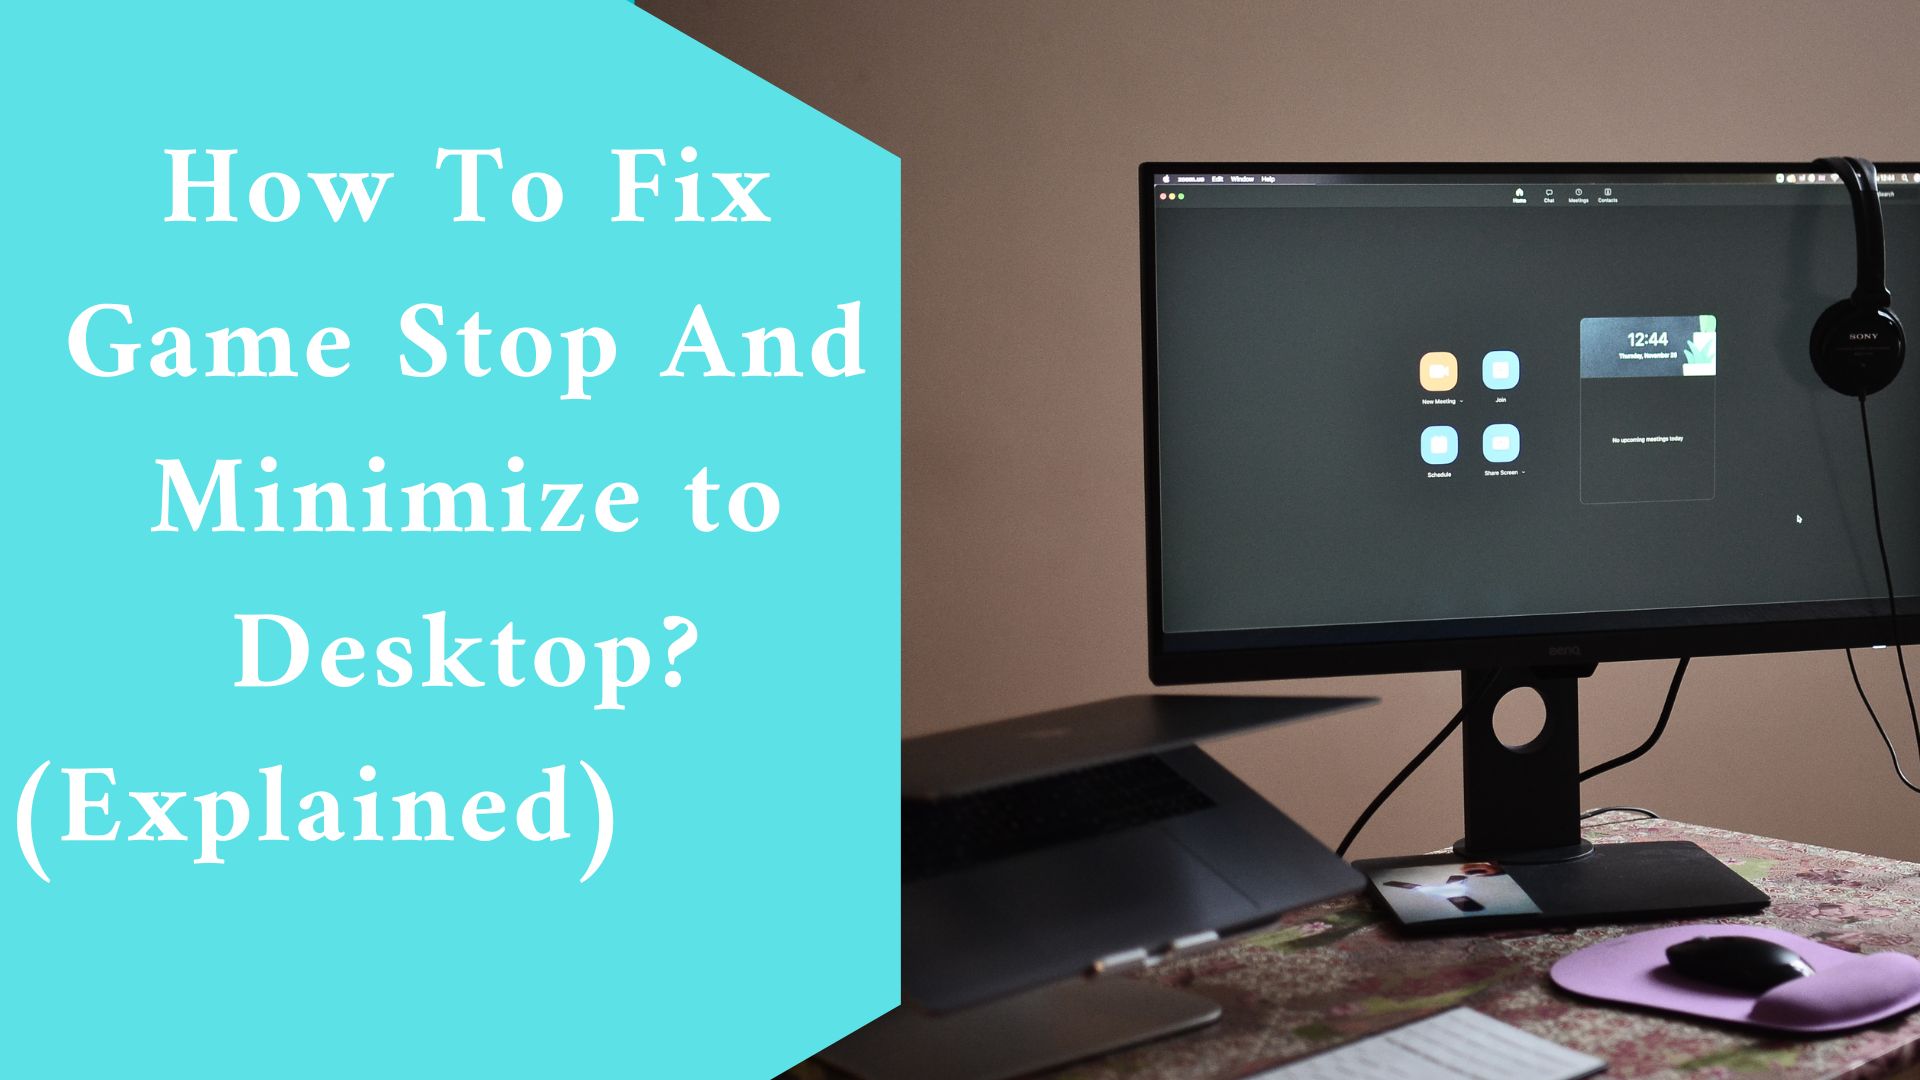 How To Fix Game Stop And Minimize to Desktop? (Explained)